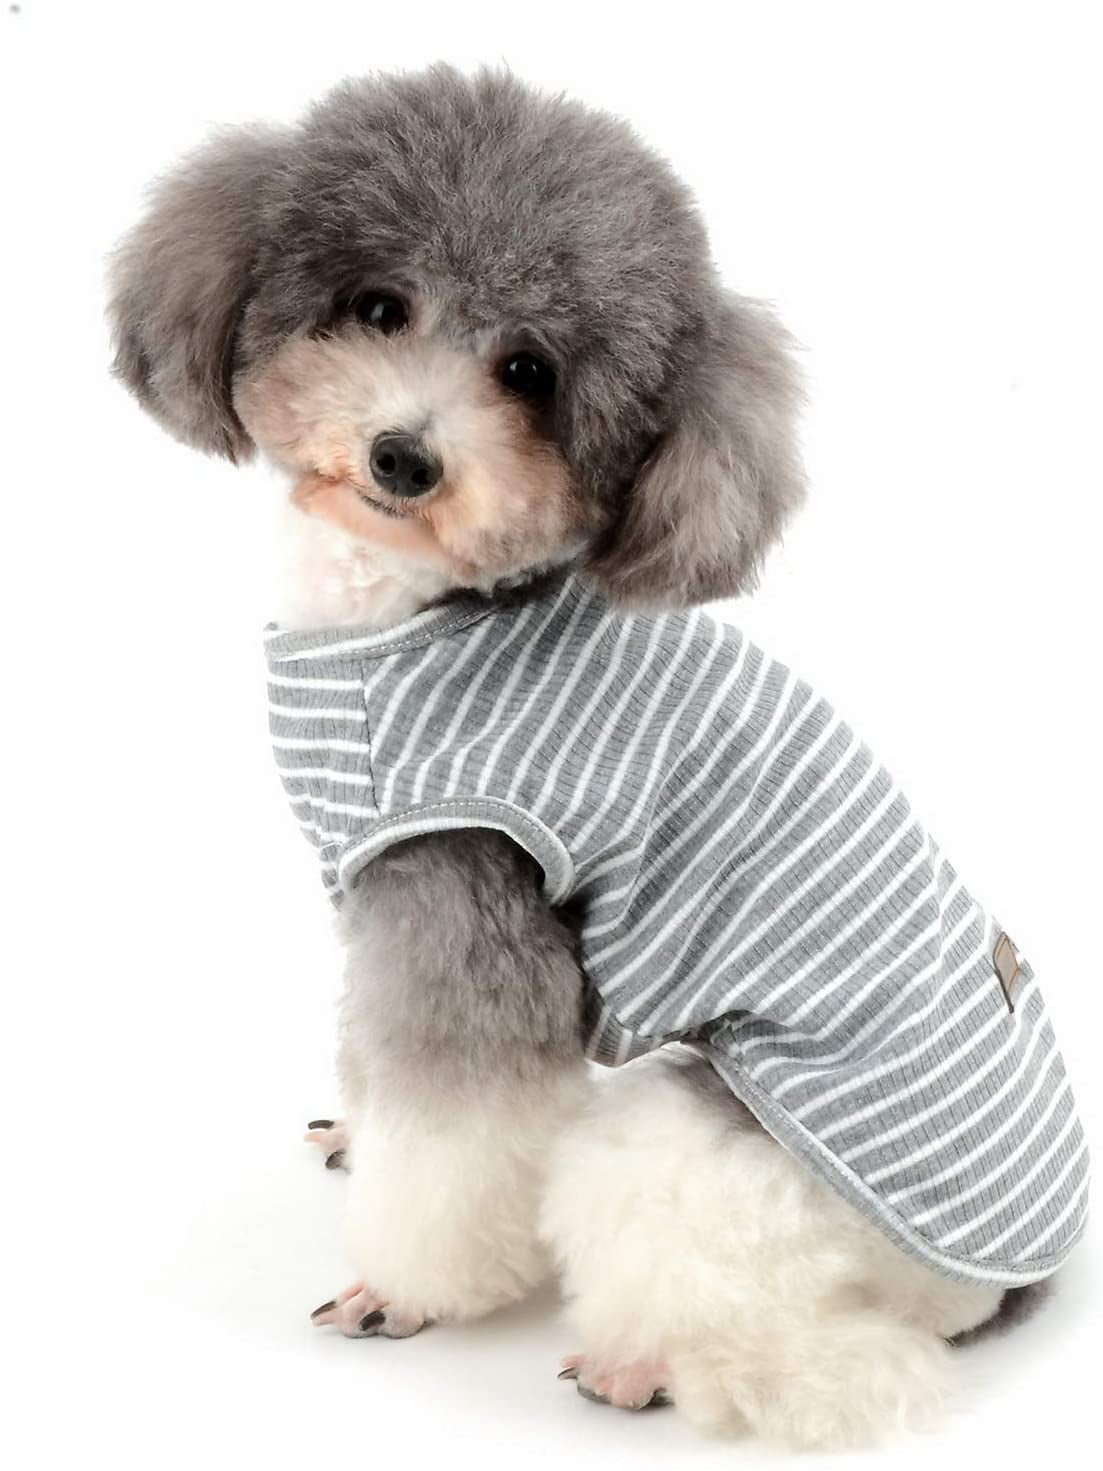 Becobe New Pet Fashion Jackets Autumn and Comfortable Keep Warm Cat Dog Clothing Pet T-Shirt Dog Apparel Puppy Pet Clothes for Dogs Cute Soft Vest Tank Tops Sweatshirt S/M/L/XL/XXL Army Green, S